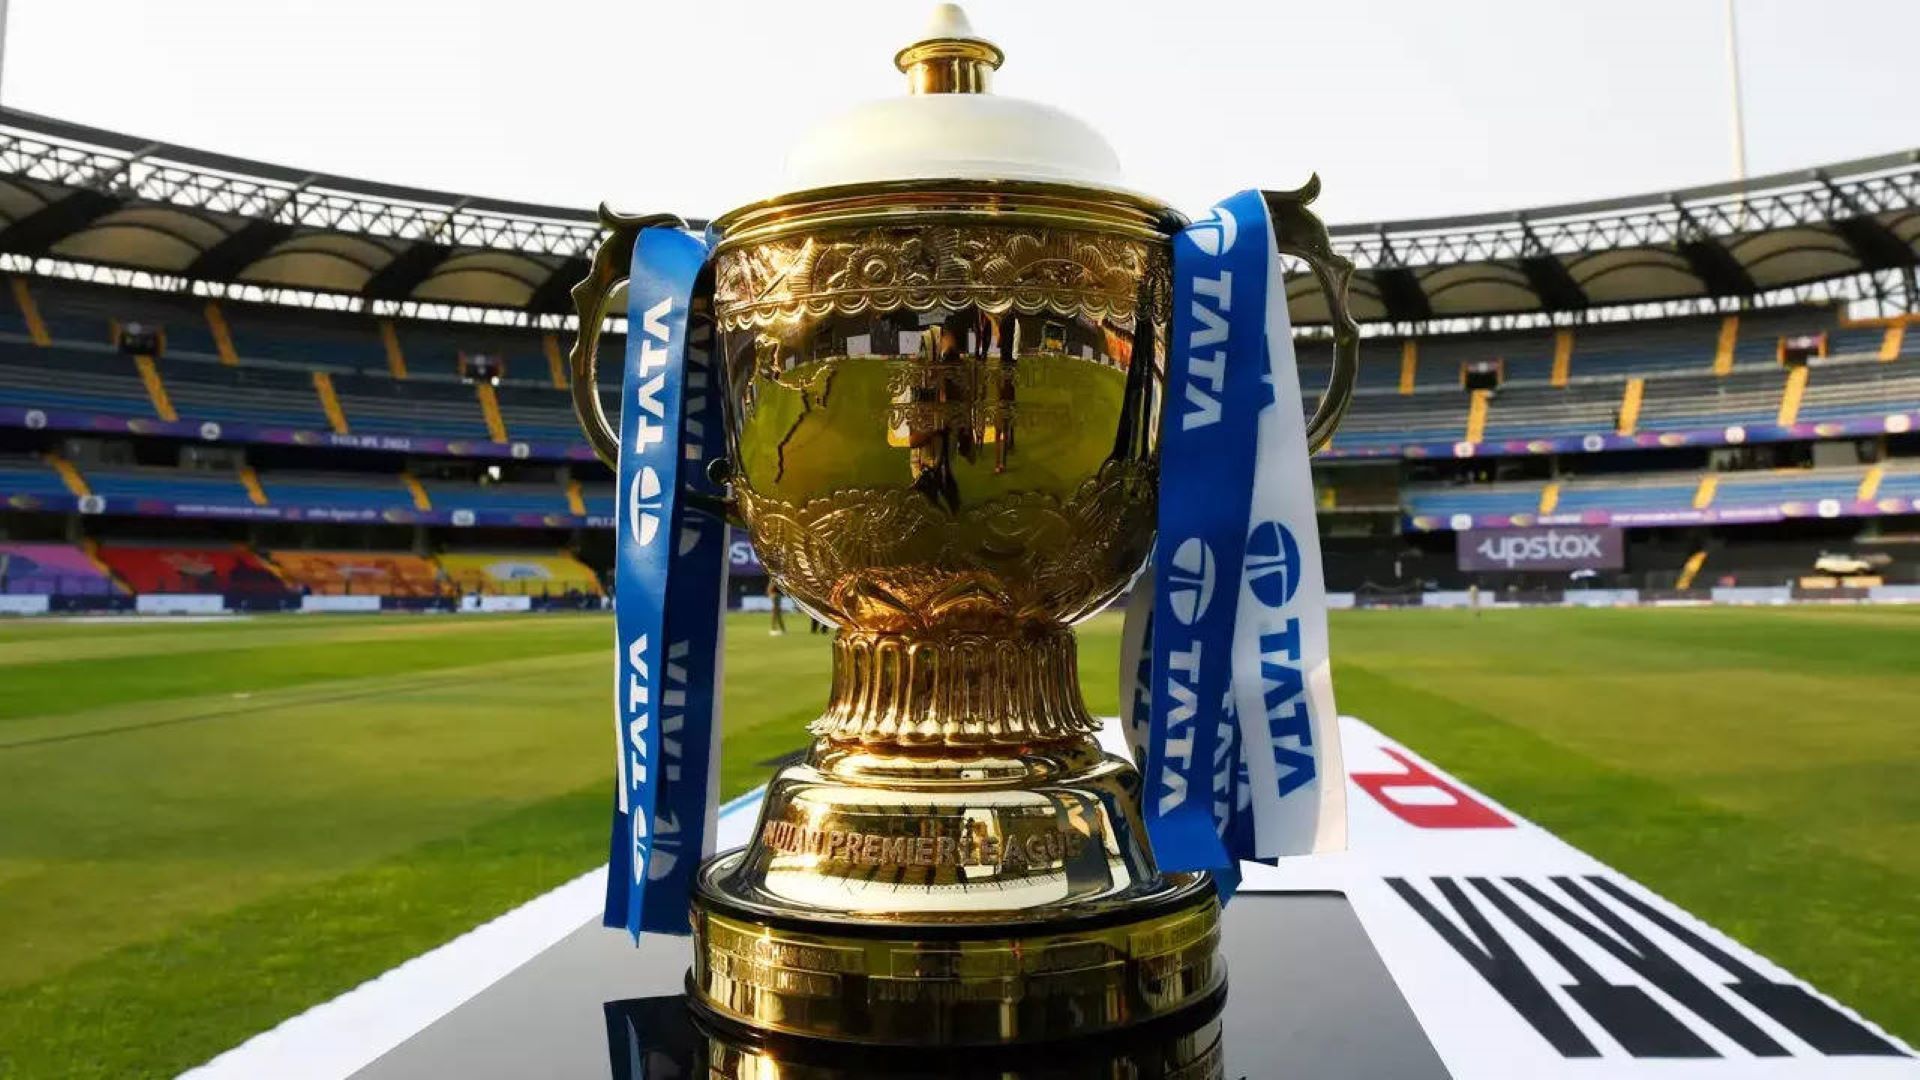 IPL 2023 will have some innovative new rules in play.